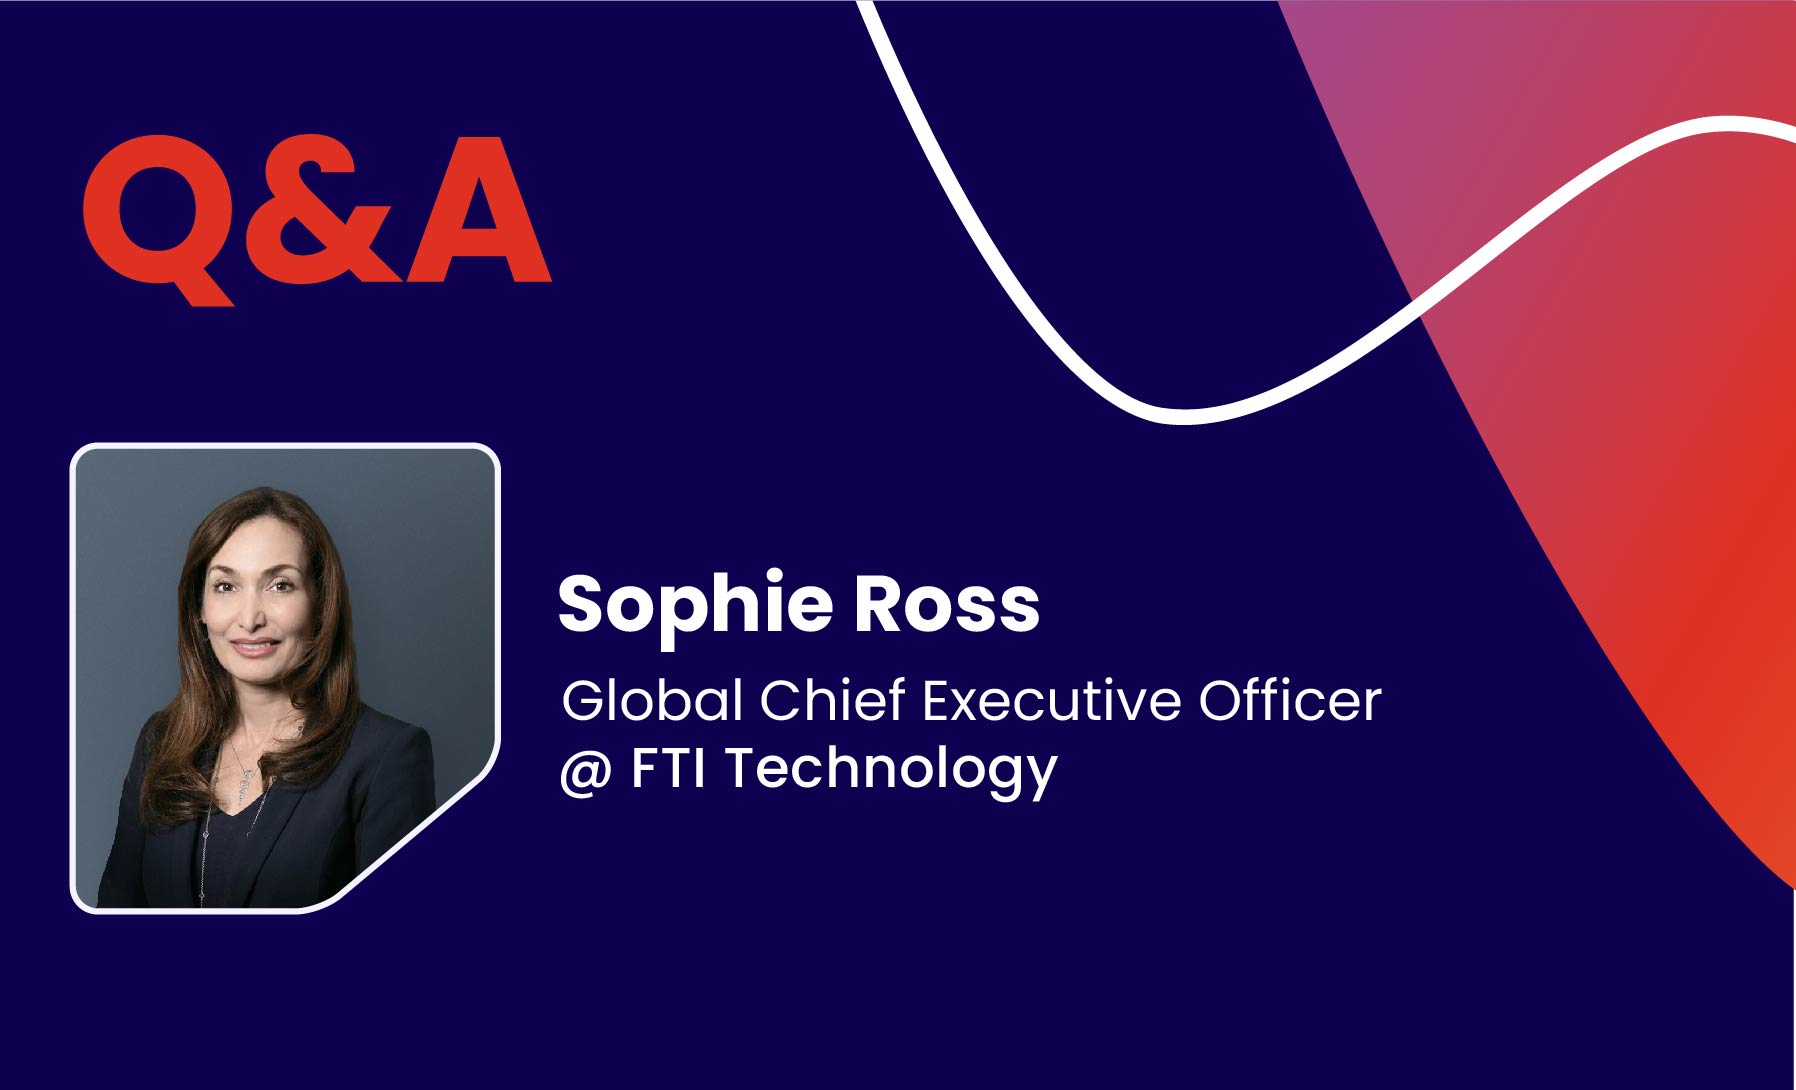 Q&A with Sophie Ross, Global Chief Executive Officer @ FTI Technology